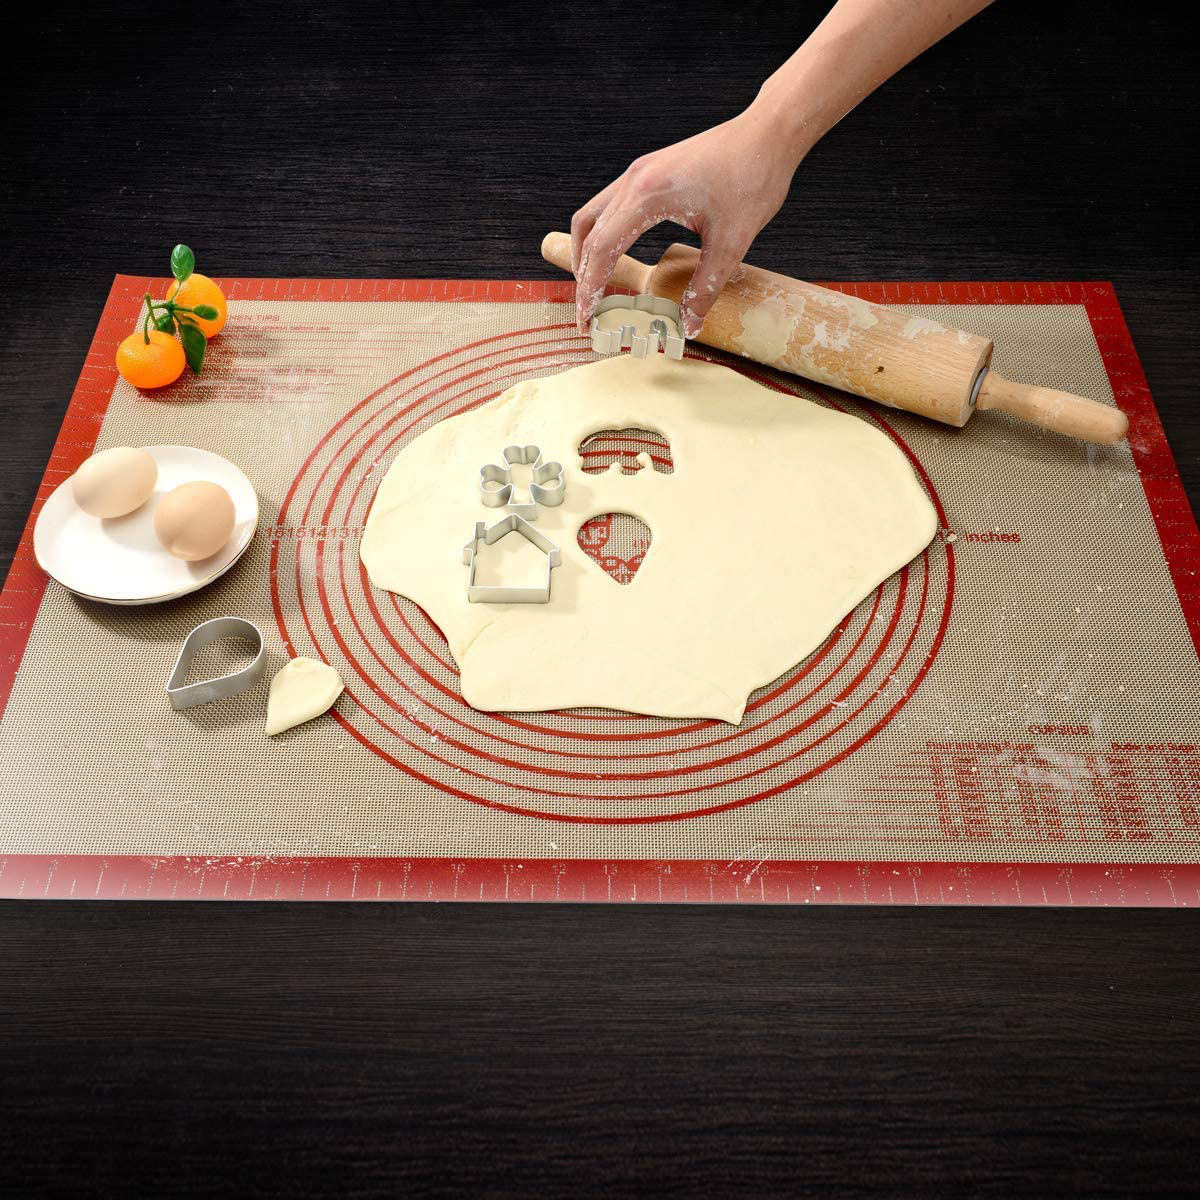 Large Silicone Pastry Baking Mat with Measurements,16 X 26 Inch Silicone Fondant Sheet, Non-Slip Mat Sticks to Countertop for Rolling Dough ，Pie and Baking Mat by Folksy Super Kitchen (16X26, Red)